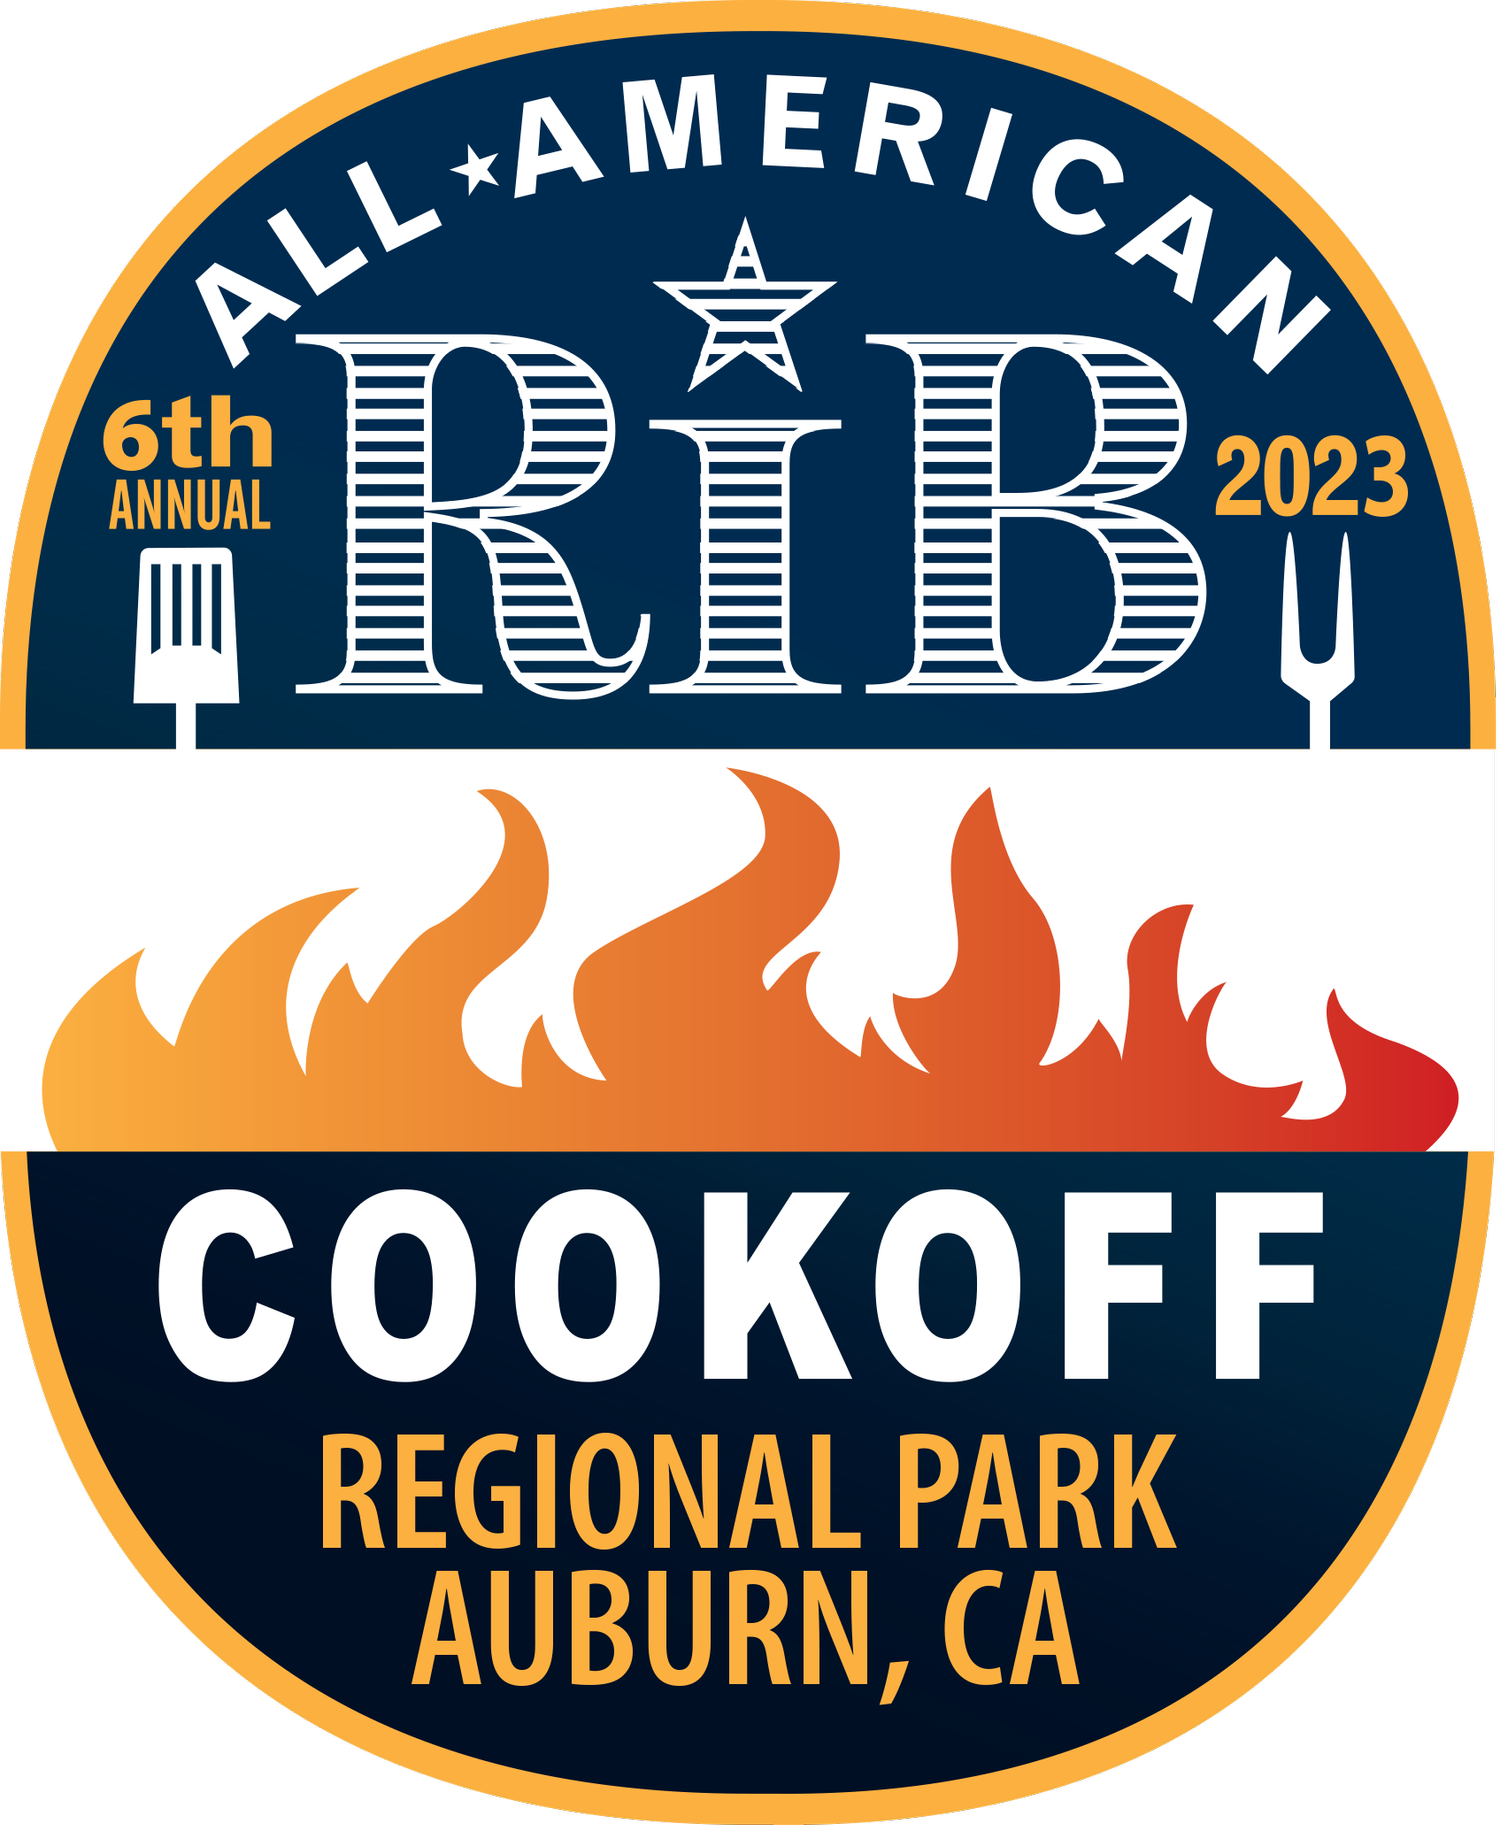 All American Rib Cook-Off